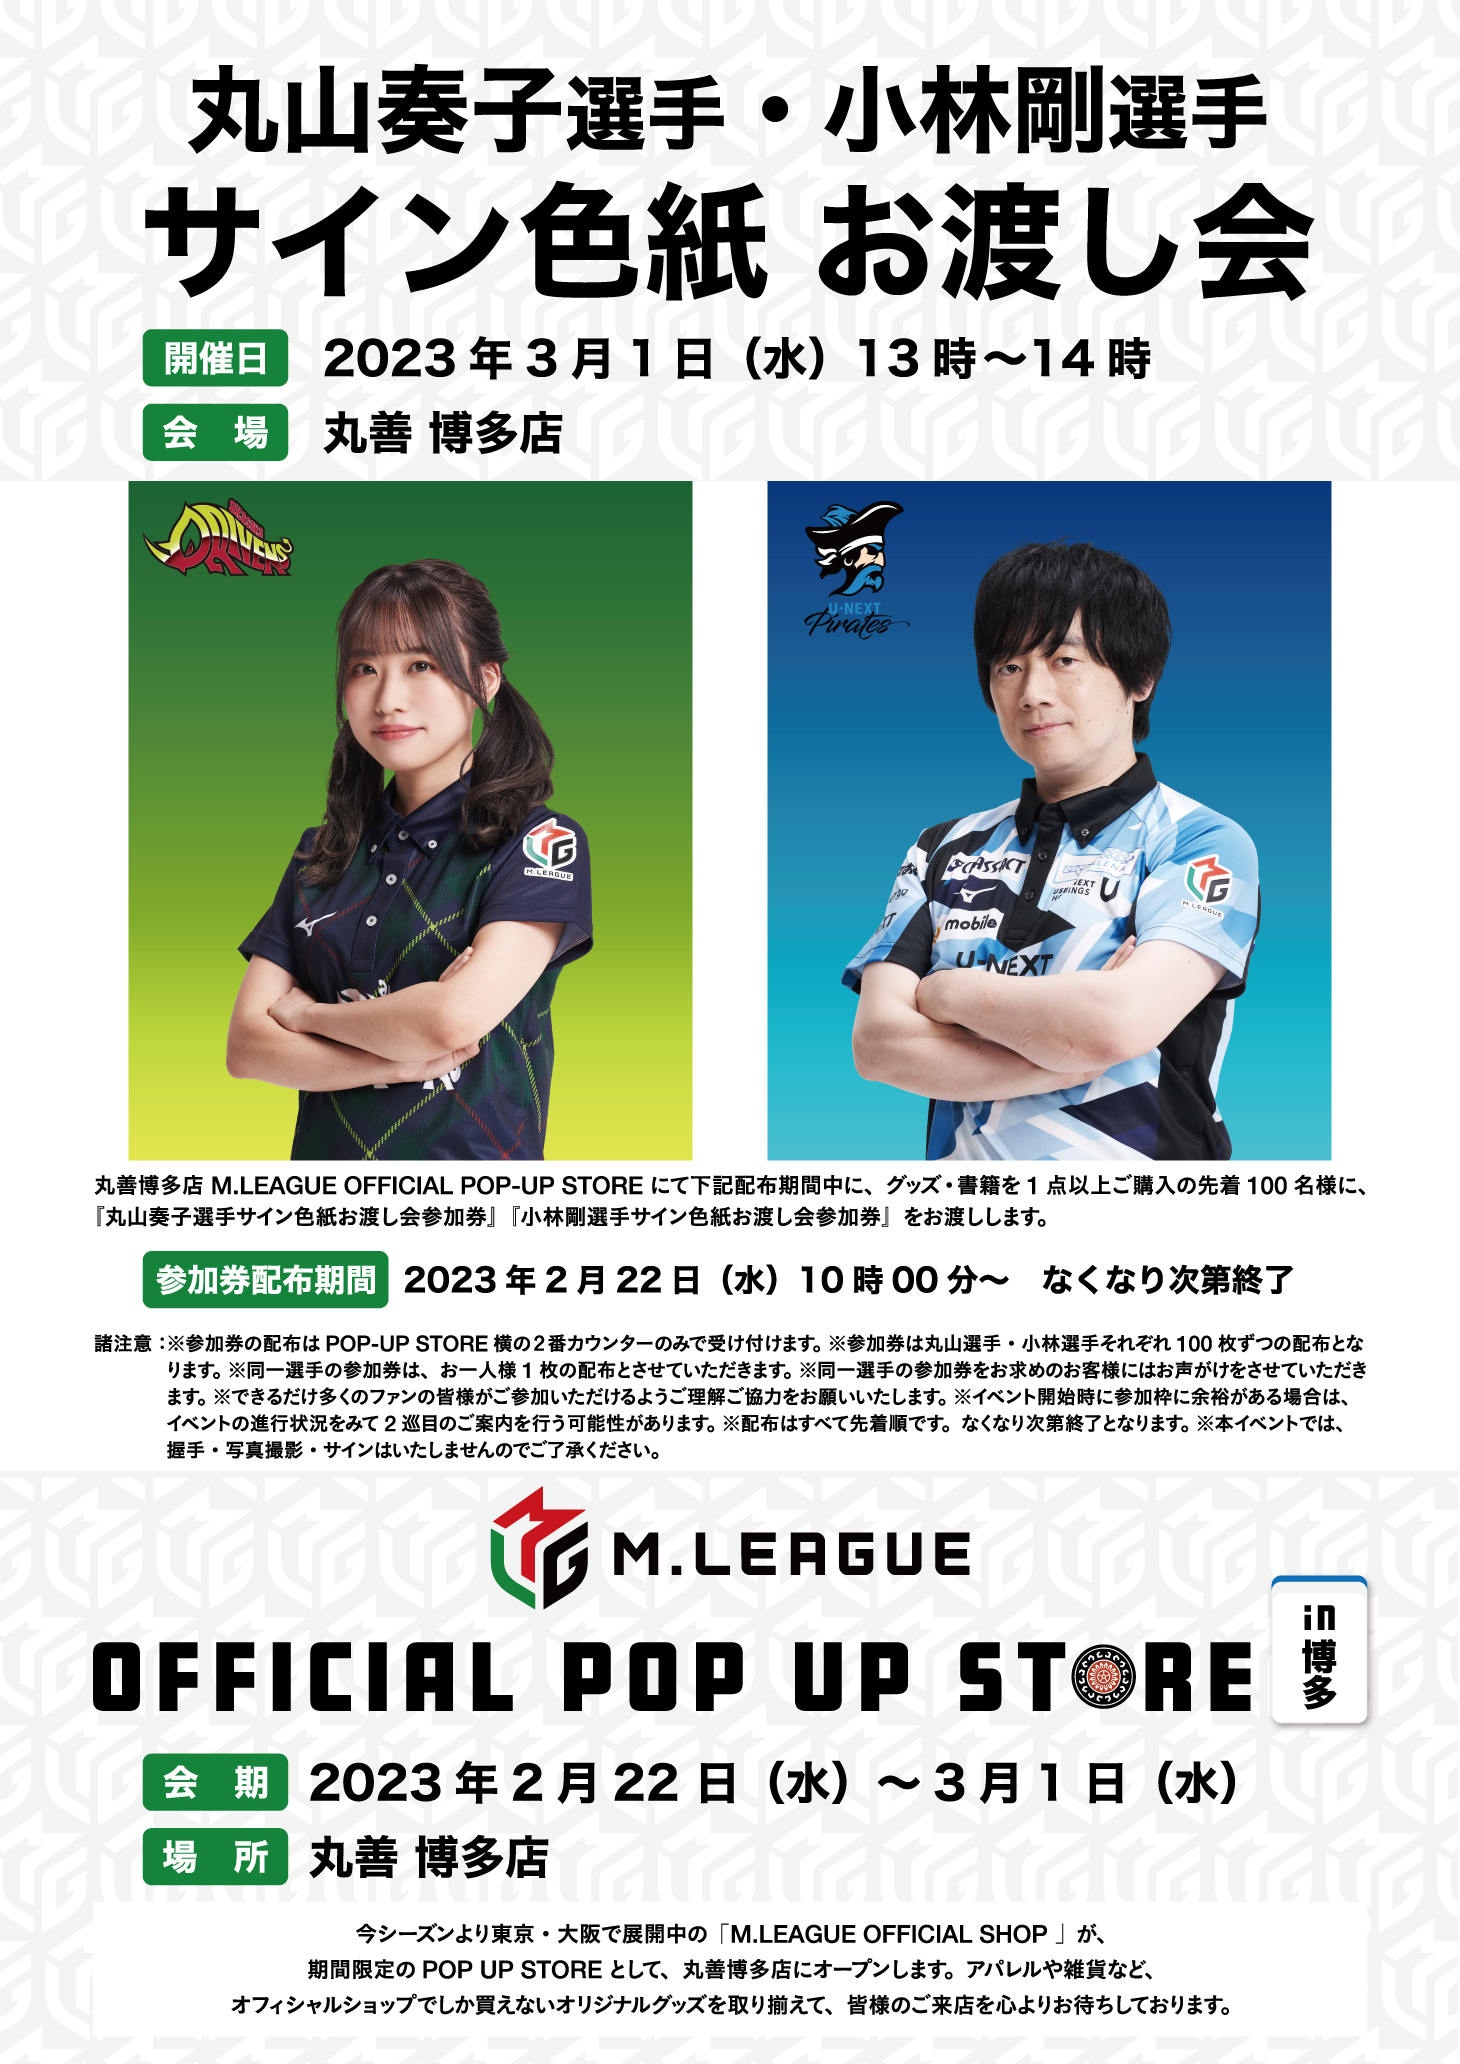 M.LEAGUE OFFICIAL POP-UP STORE　in　丸善博多店　開催のお知らせ